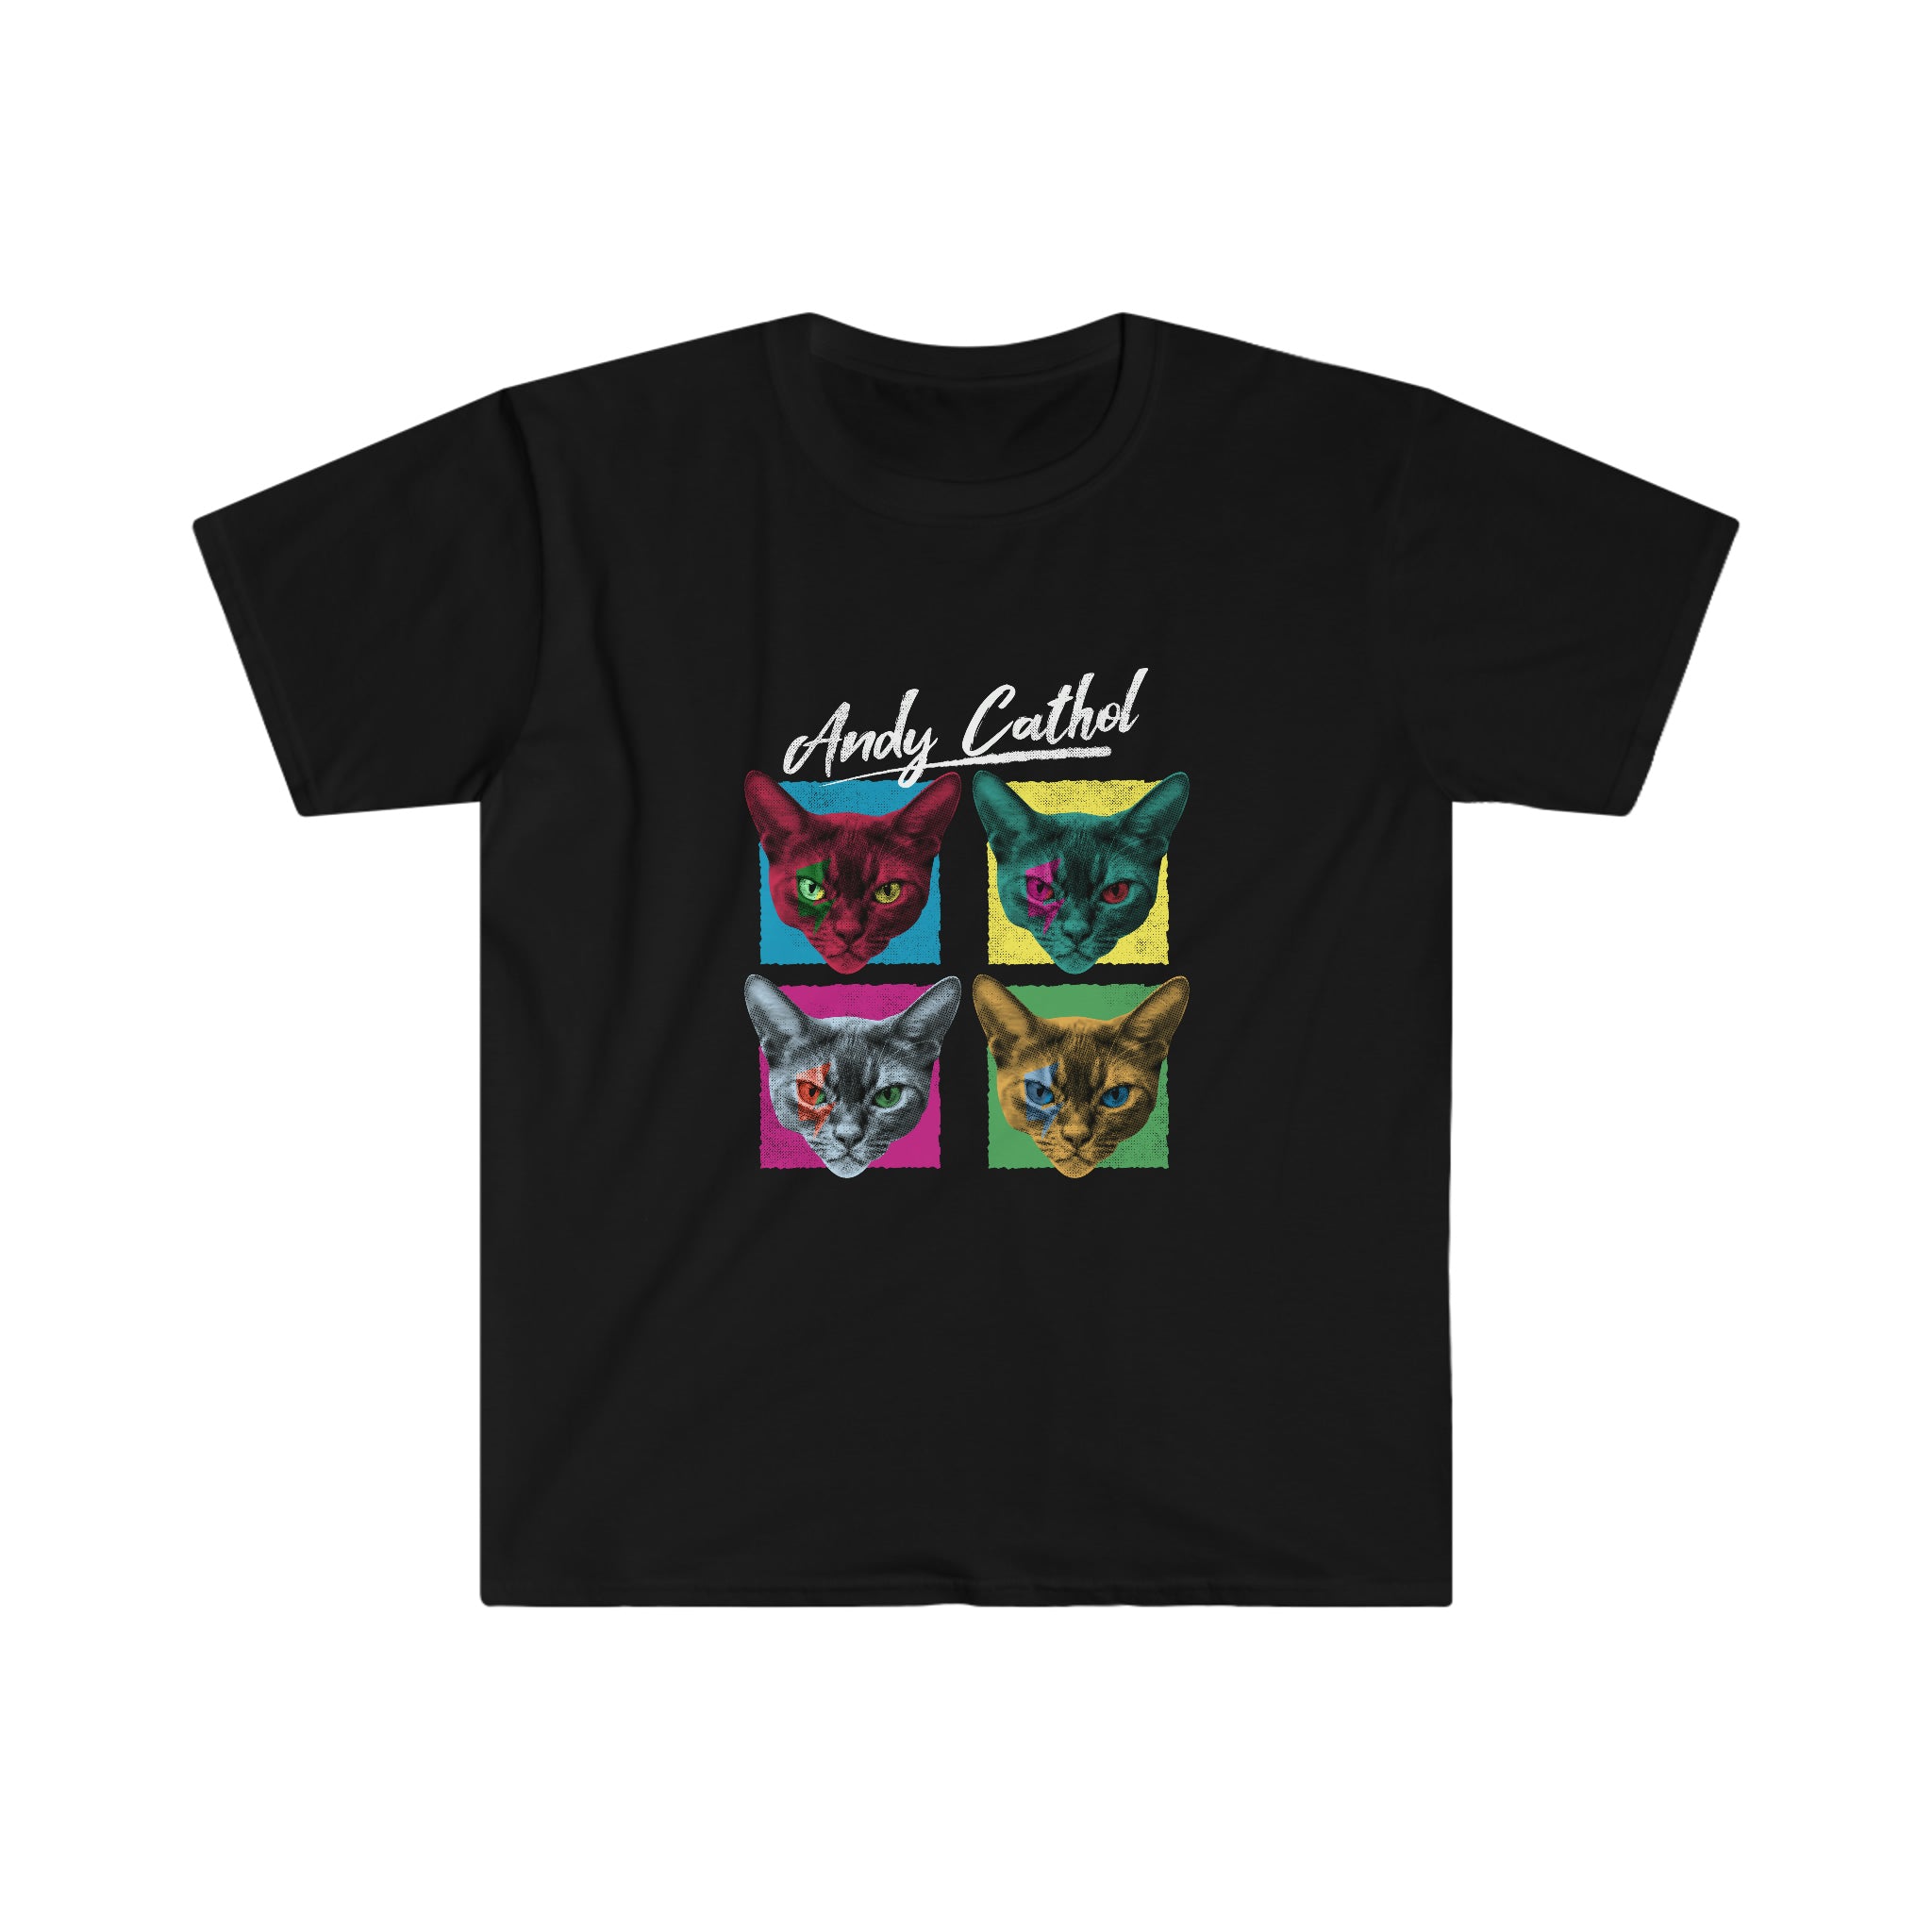 A stylish black Andy Cathol T-shirt featuring four cats, made of 100% cotton.